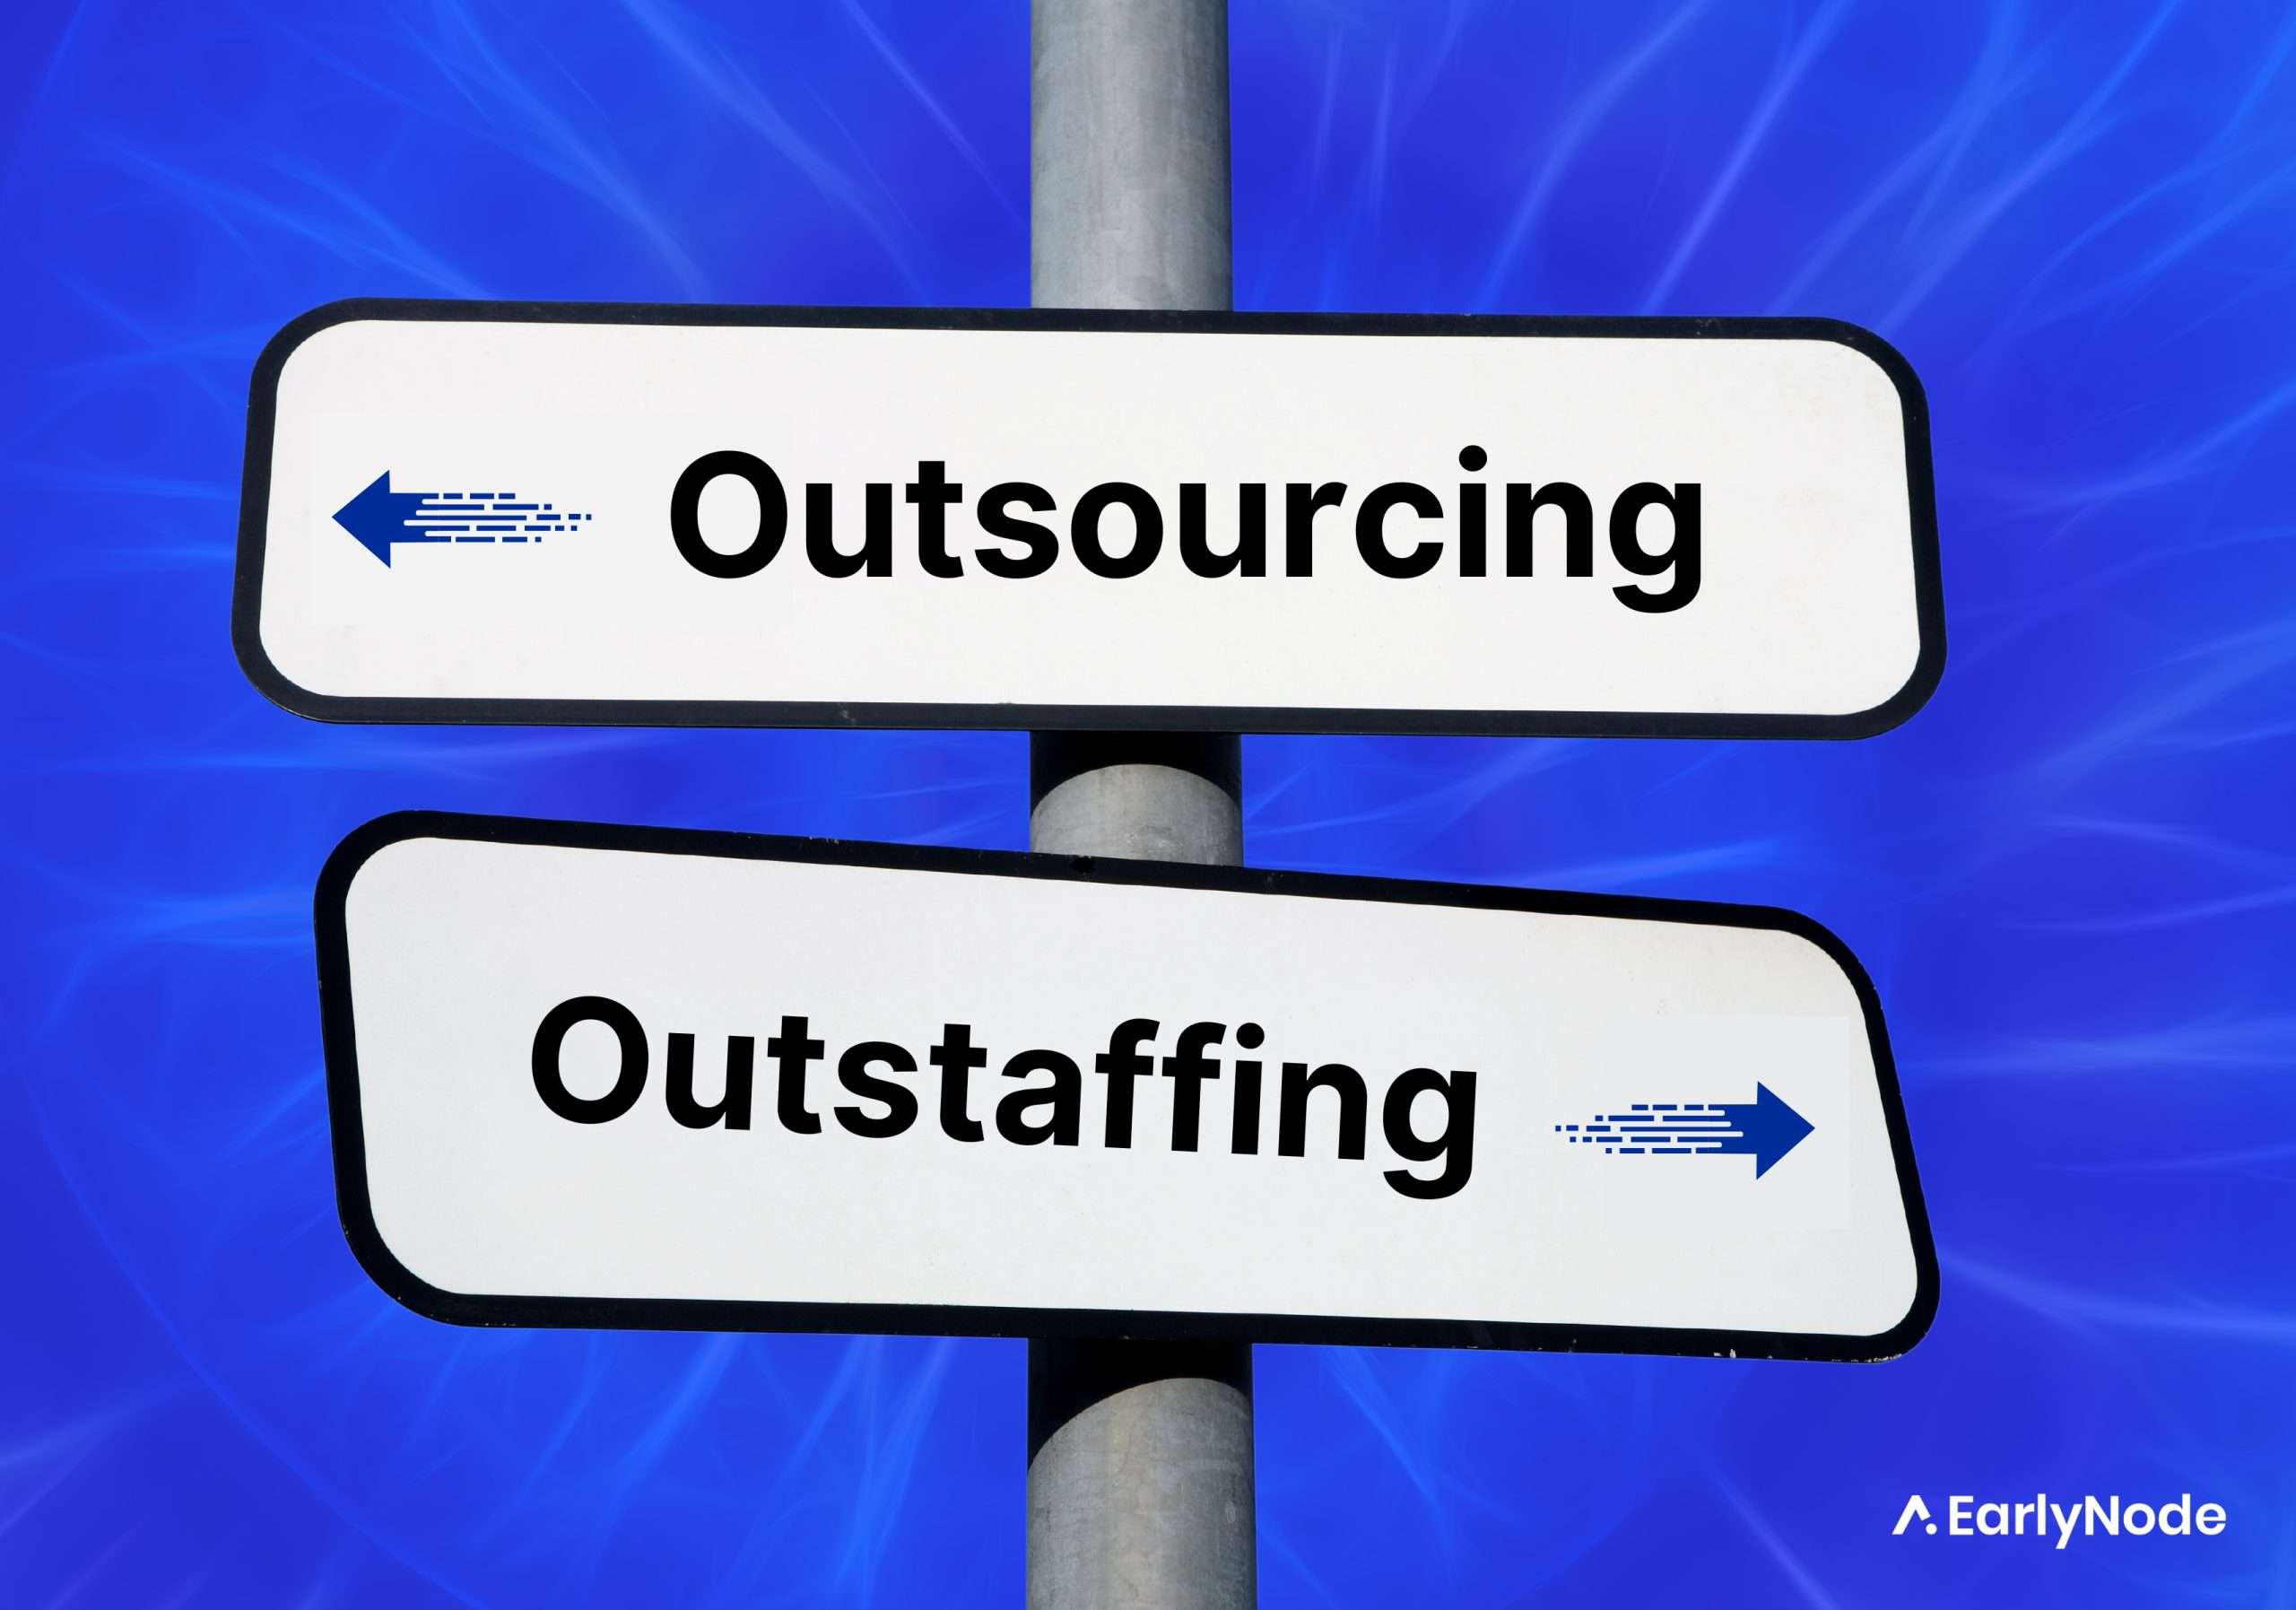 Outsourcing vs. Outstaffing for Software Development